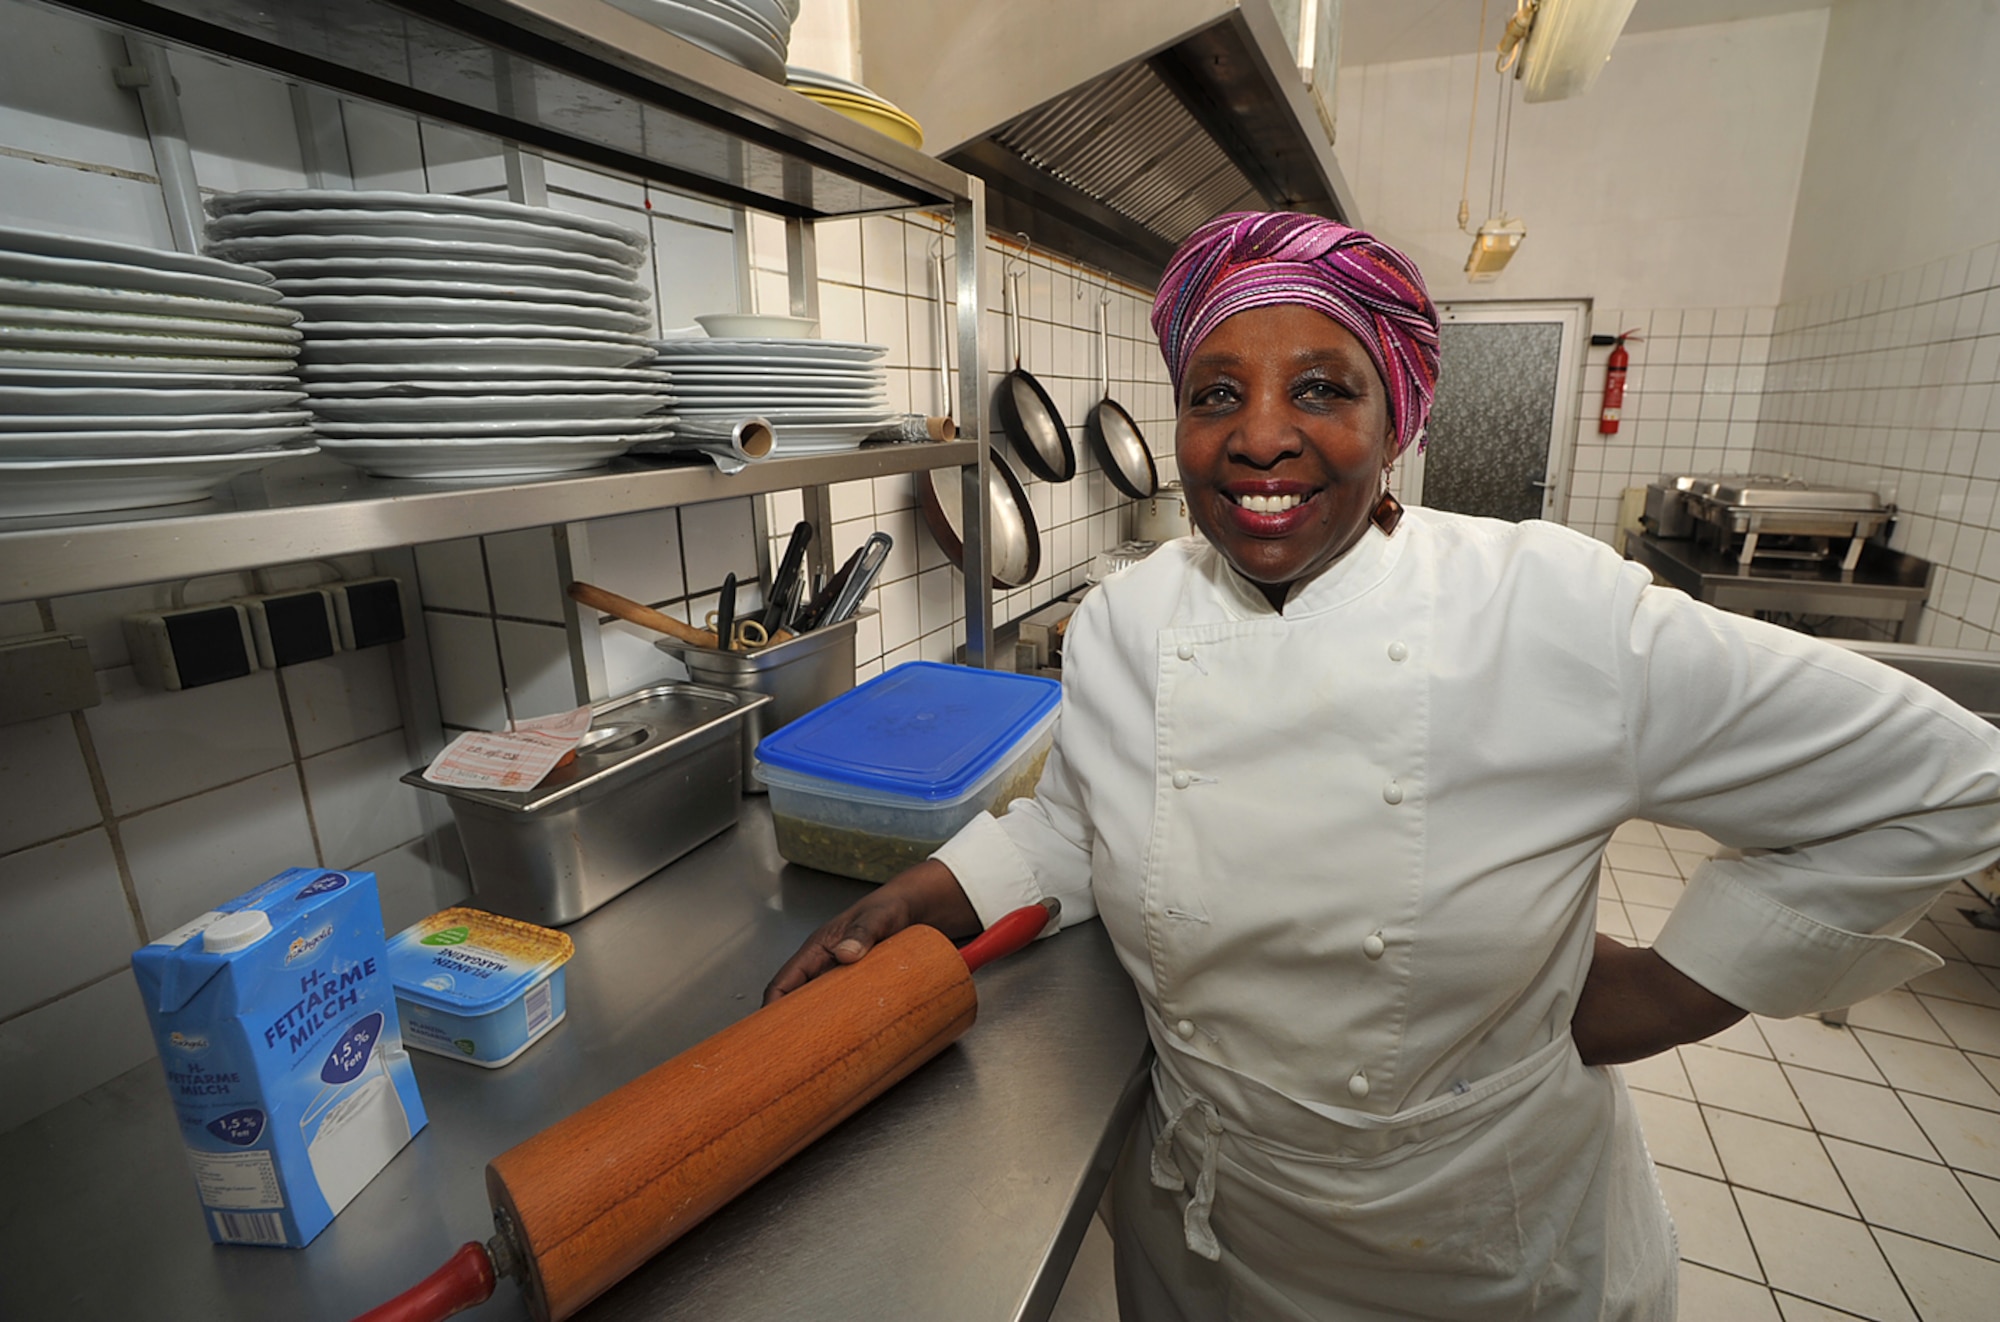 Brenda 'Mama' West, professional chef, poses for a photo in the kitchen of her restaurant, Ramstein village, Germany, Feb. 25, 2010. Mama West has been volunteering her time and cooking skills to feed U.S. servicemembers and wounded warriors in the KMC for over a decade. (U.S. Air Force photo by Senior Airman Tony R. Ritter)